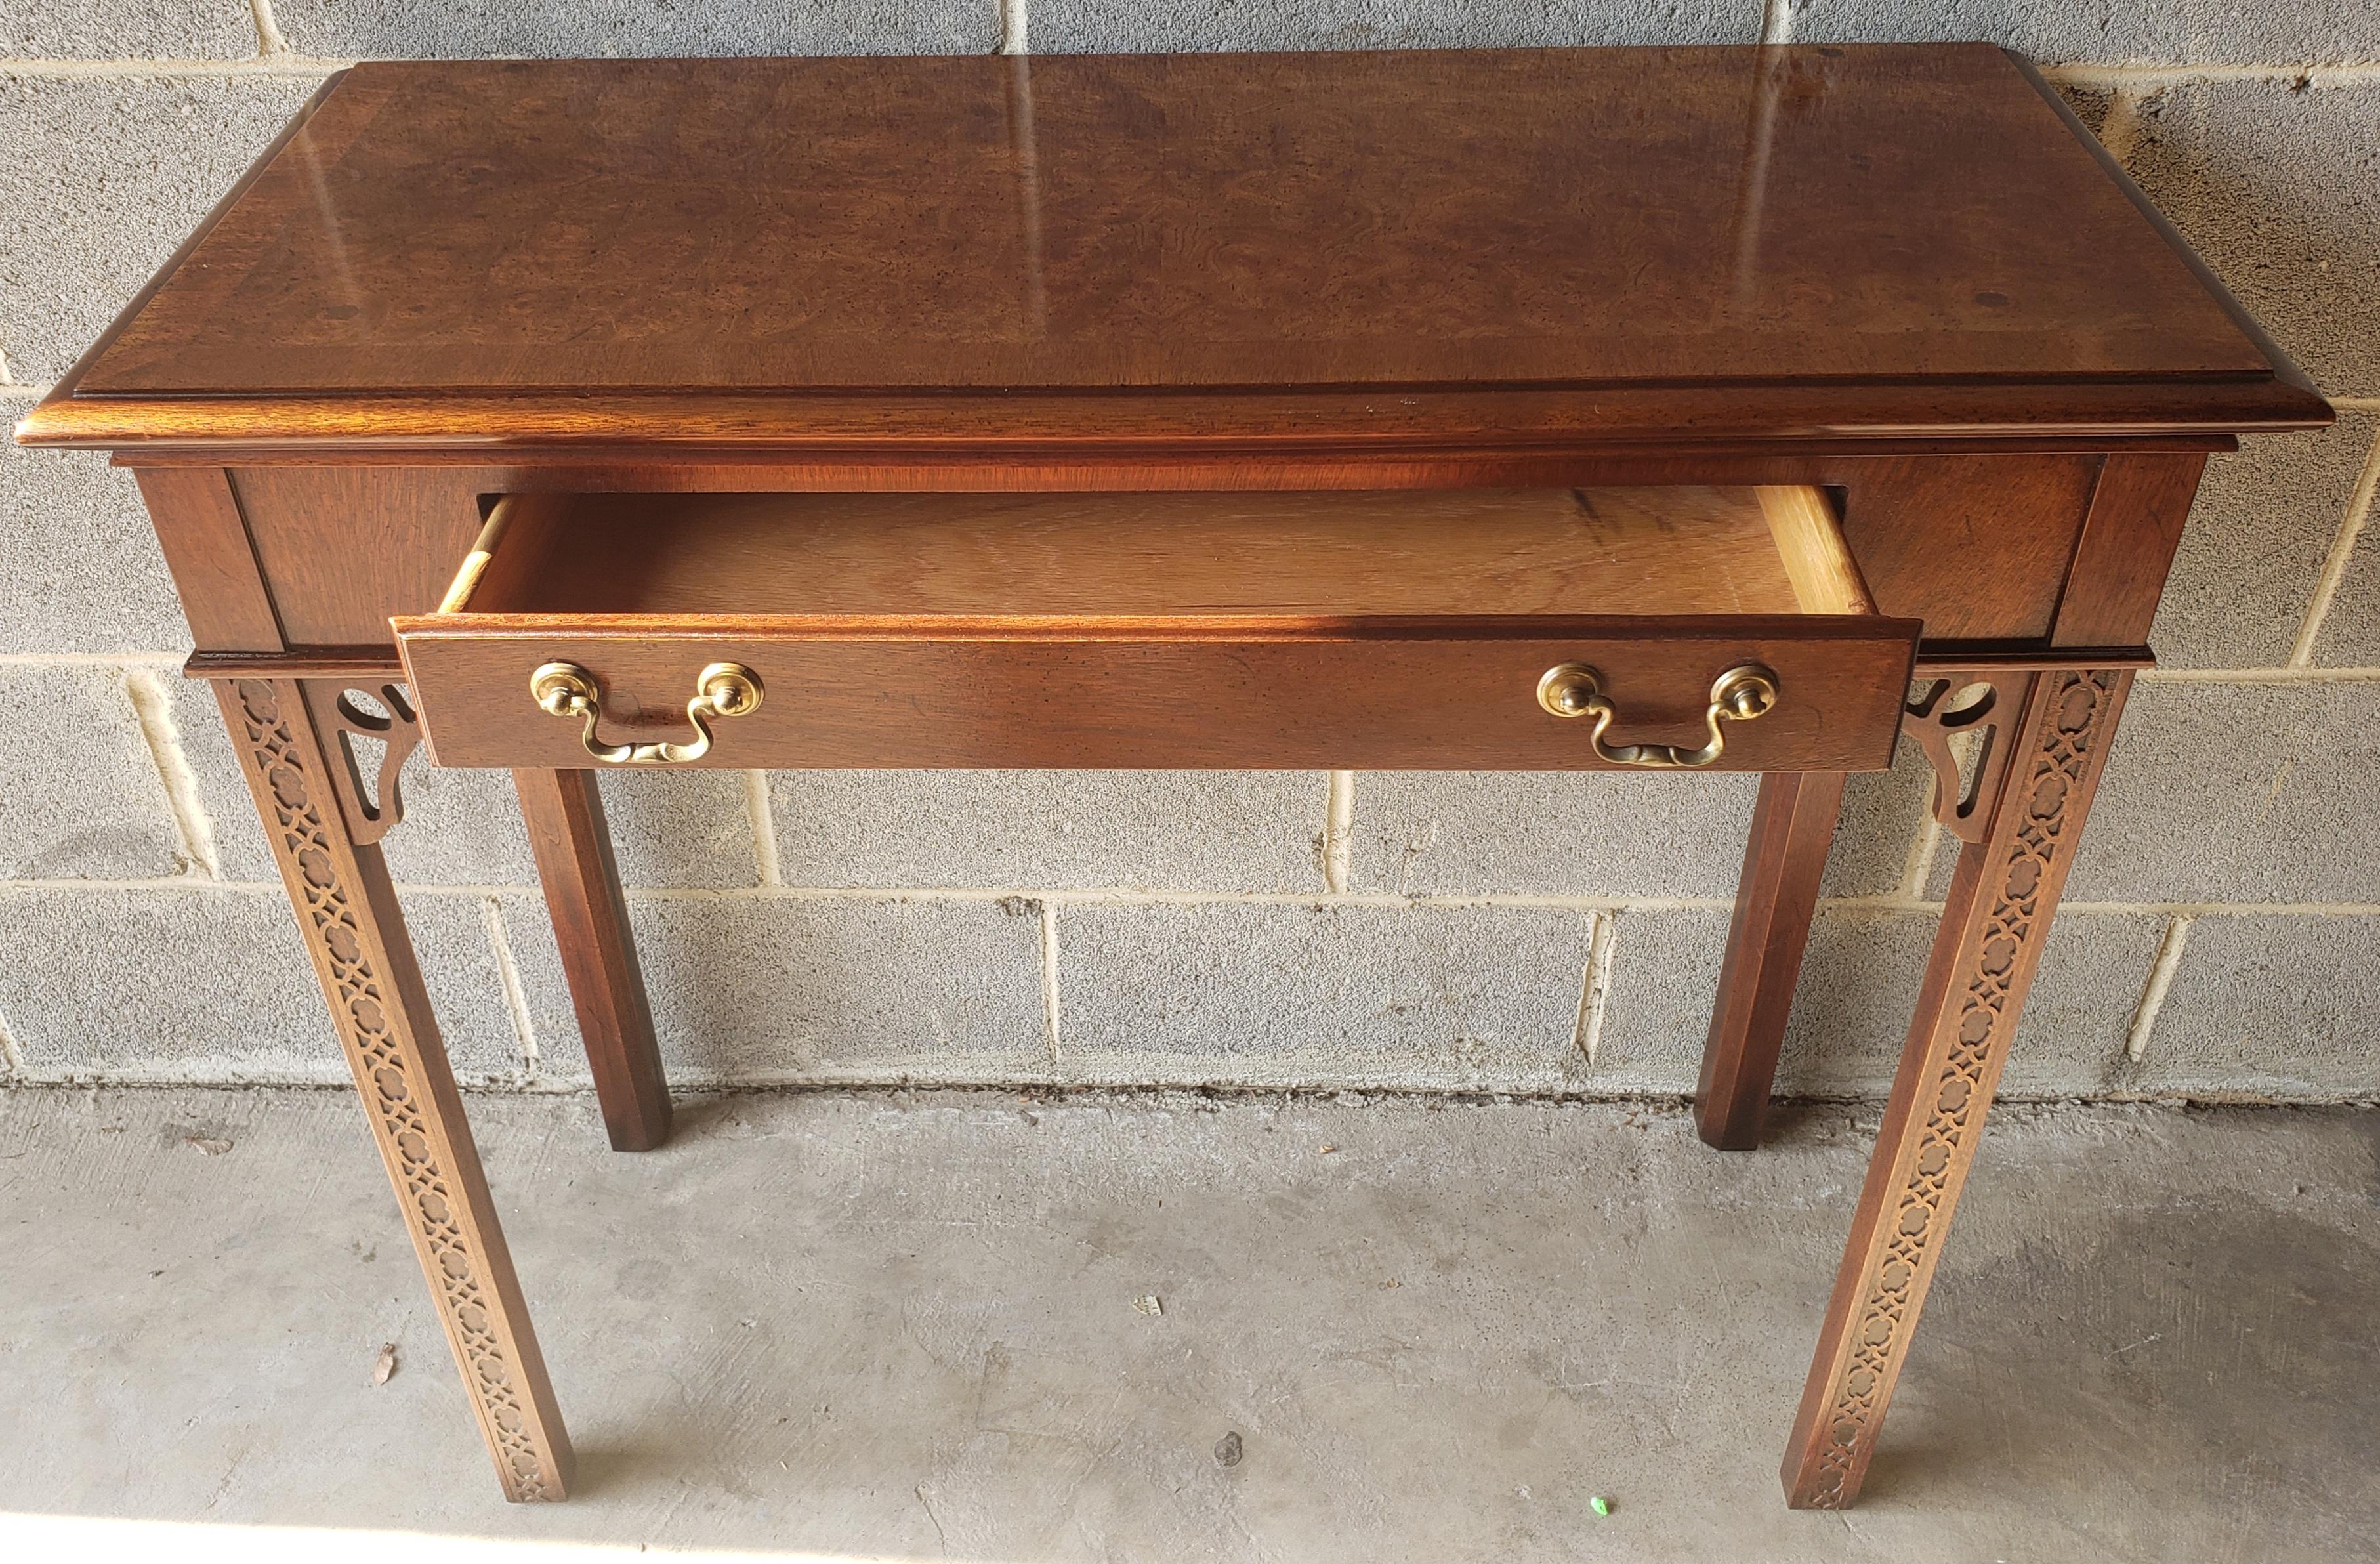 1970s Chippendale Walnut Burl Console Table with Fretwork and Banded Top For Sale 3